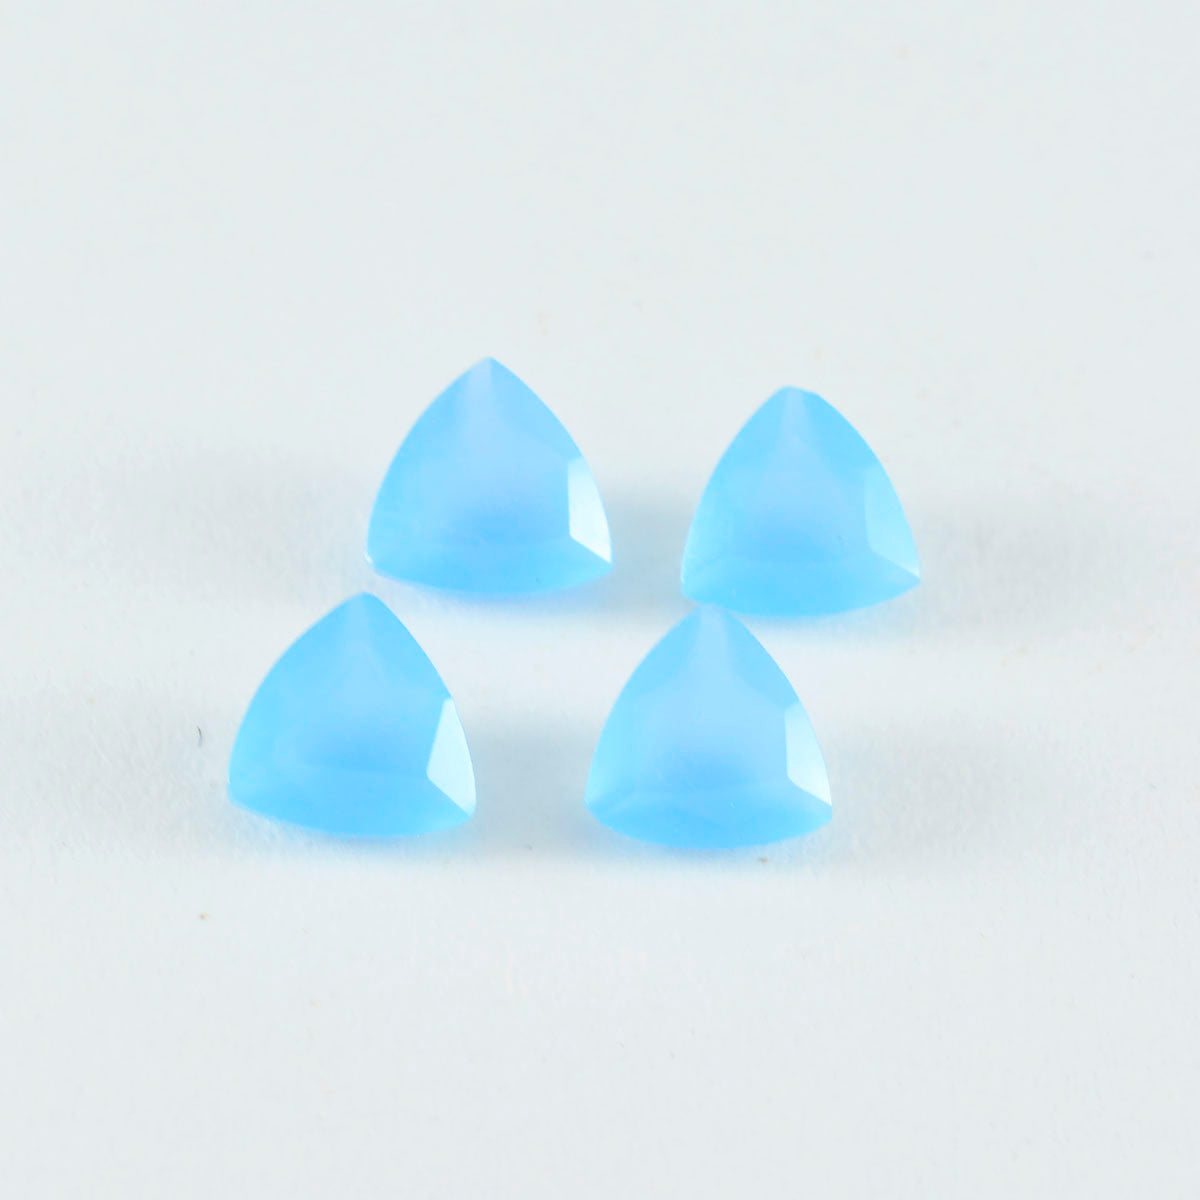 Riyogems 1PC Real Blue Chalcedony Faceted 8x8 mm Trillion Shape handsome Quality Stone